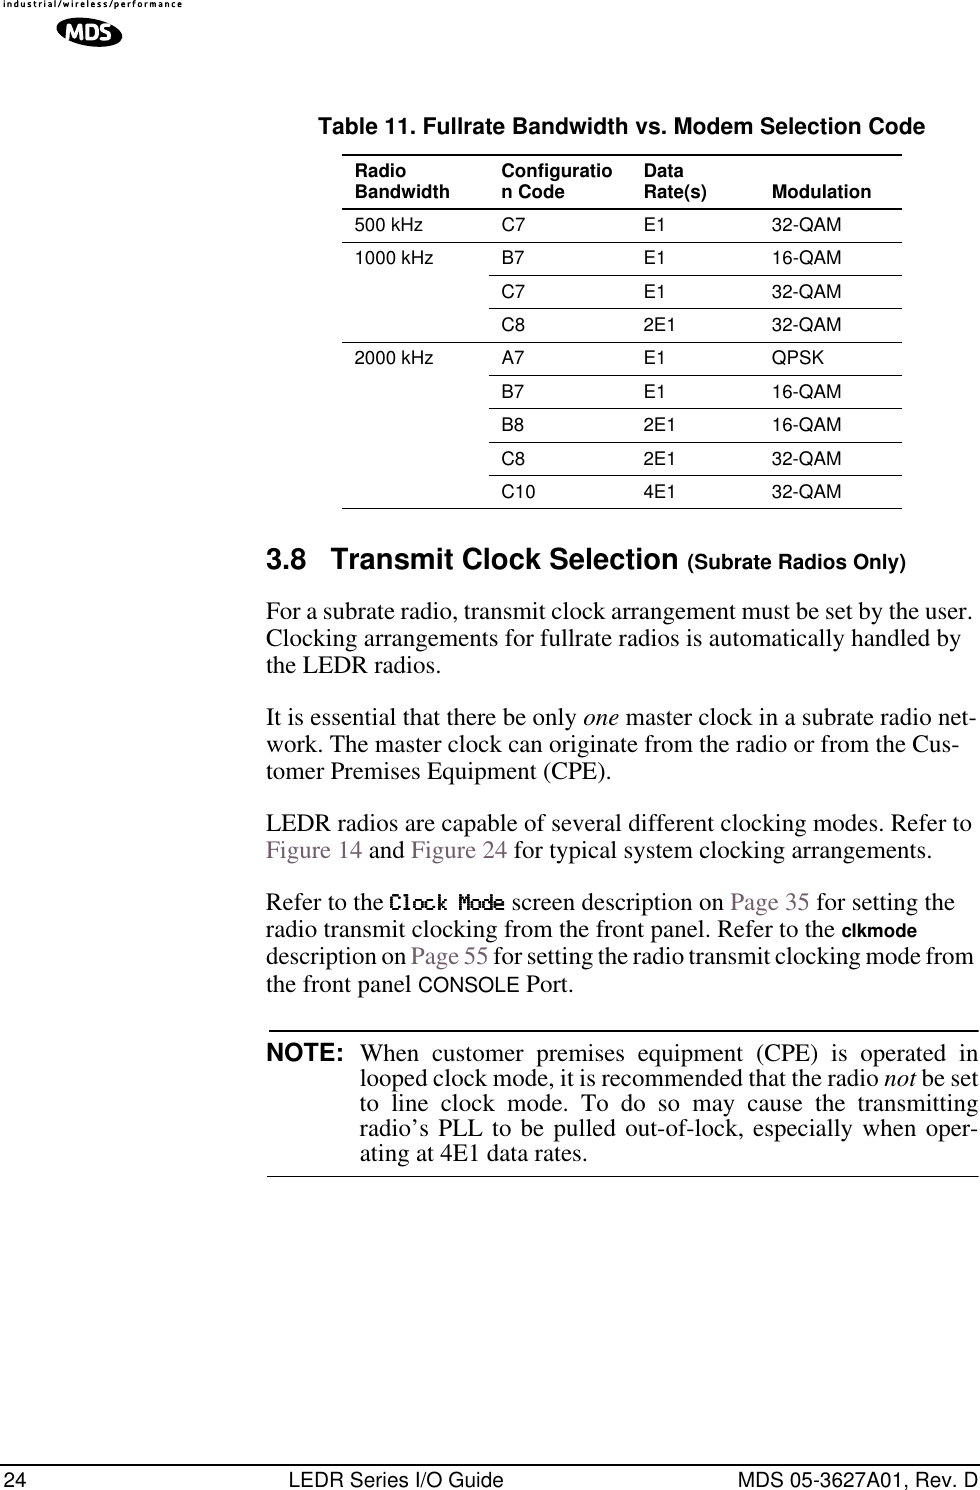 24 LEDR Series I/O Guide MDS 05-3627A01, Rev. D3.8 Transmit Clock Selection (Subrate Radios Only)For a subrate radio, transmit clock arrangement must be set by the user. Clocking arrangements for fullrate radios is automatically handled by the LEDR radios.It is essential that there be only one master clock in a subrate radio net-work. The master clock can originate from the radio or from the Cus-tomer Premises Equipment (CPE). LEDR radios are capable of several different clocking modes. Refer to Figure 14 and Figure 24 for typical system clocking arrangements.Refer to the CCCClllloooocccckkkk    MMMMooooddddeeee screen description on Page 35 for setting the radio transmit clocking from the front panel. Refer to the clkmode description on Page 55 for setting the radio transmit clocking mode from the front panel CONSOLE Port.NOTE: When customer premises equipment (CPE) is operated inlooped clock mode, it is recommended that the radio not be setto line clock mode. To do so may cause the transmittingradio’s PLL to be pulled out-of-lock, especially when oper-ating at 4E1 data rates.Table 11. Fullrate Bandwidth vs. Modem Selection Code  Radio Bandwidth Configuration Code Data Rate(s) Modulation500 kHz C7 E1 32-QAM1000 kHz B7 E1 16-QAMC7 E1 32-QAMC8 2E1 32-QAM2000 kHz A7 E1 QPSKB7 E1 16-QAMB8 2E1 16-QAMC8 2E1 32-QAMC10 4E1 32-QAM